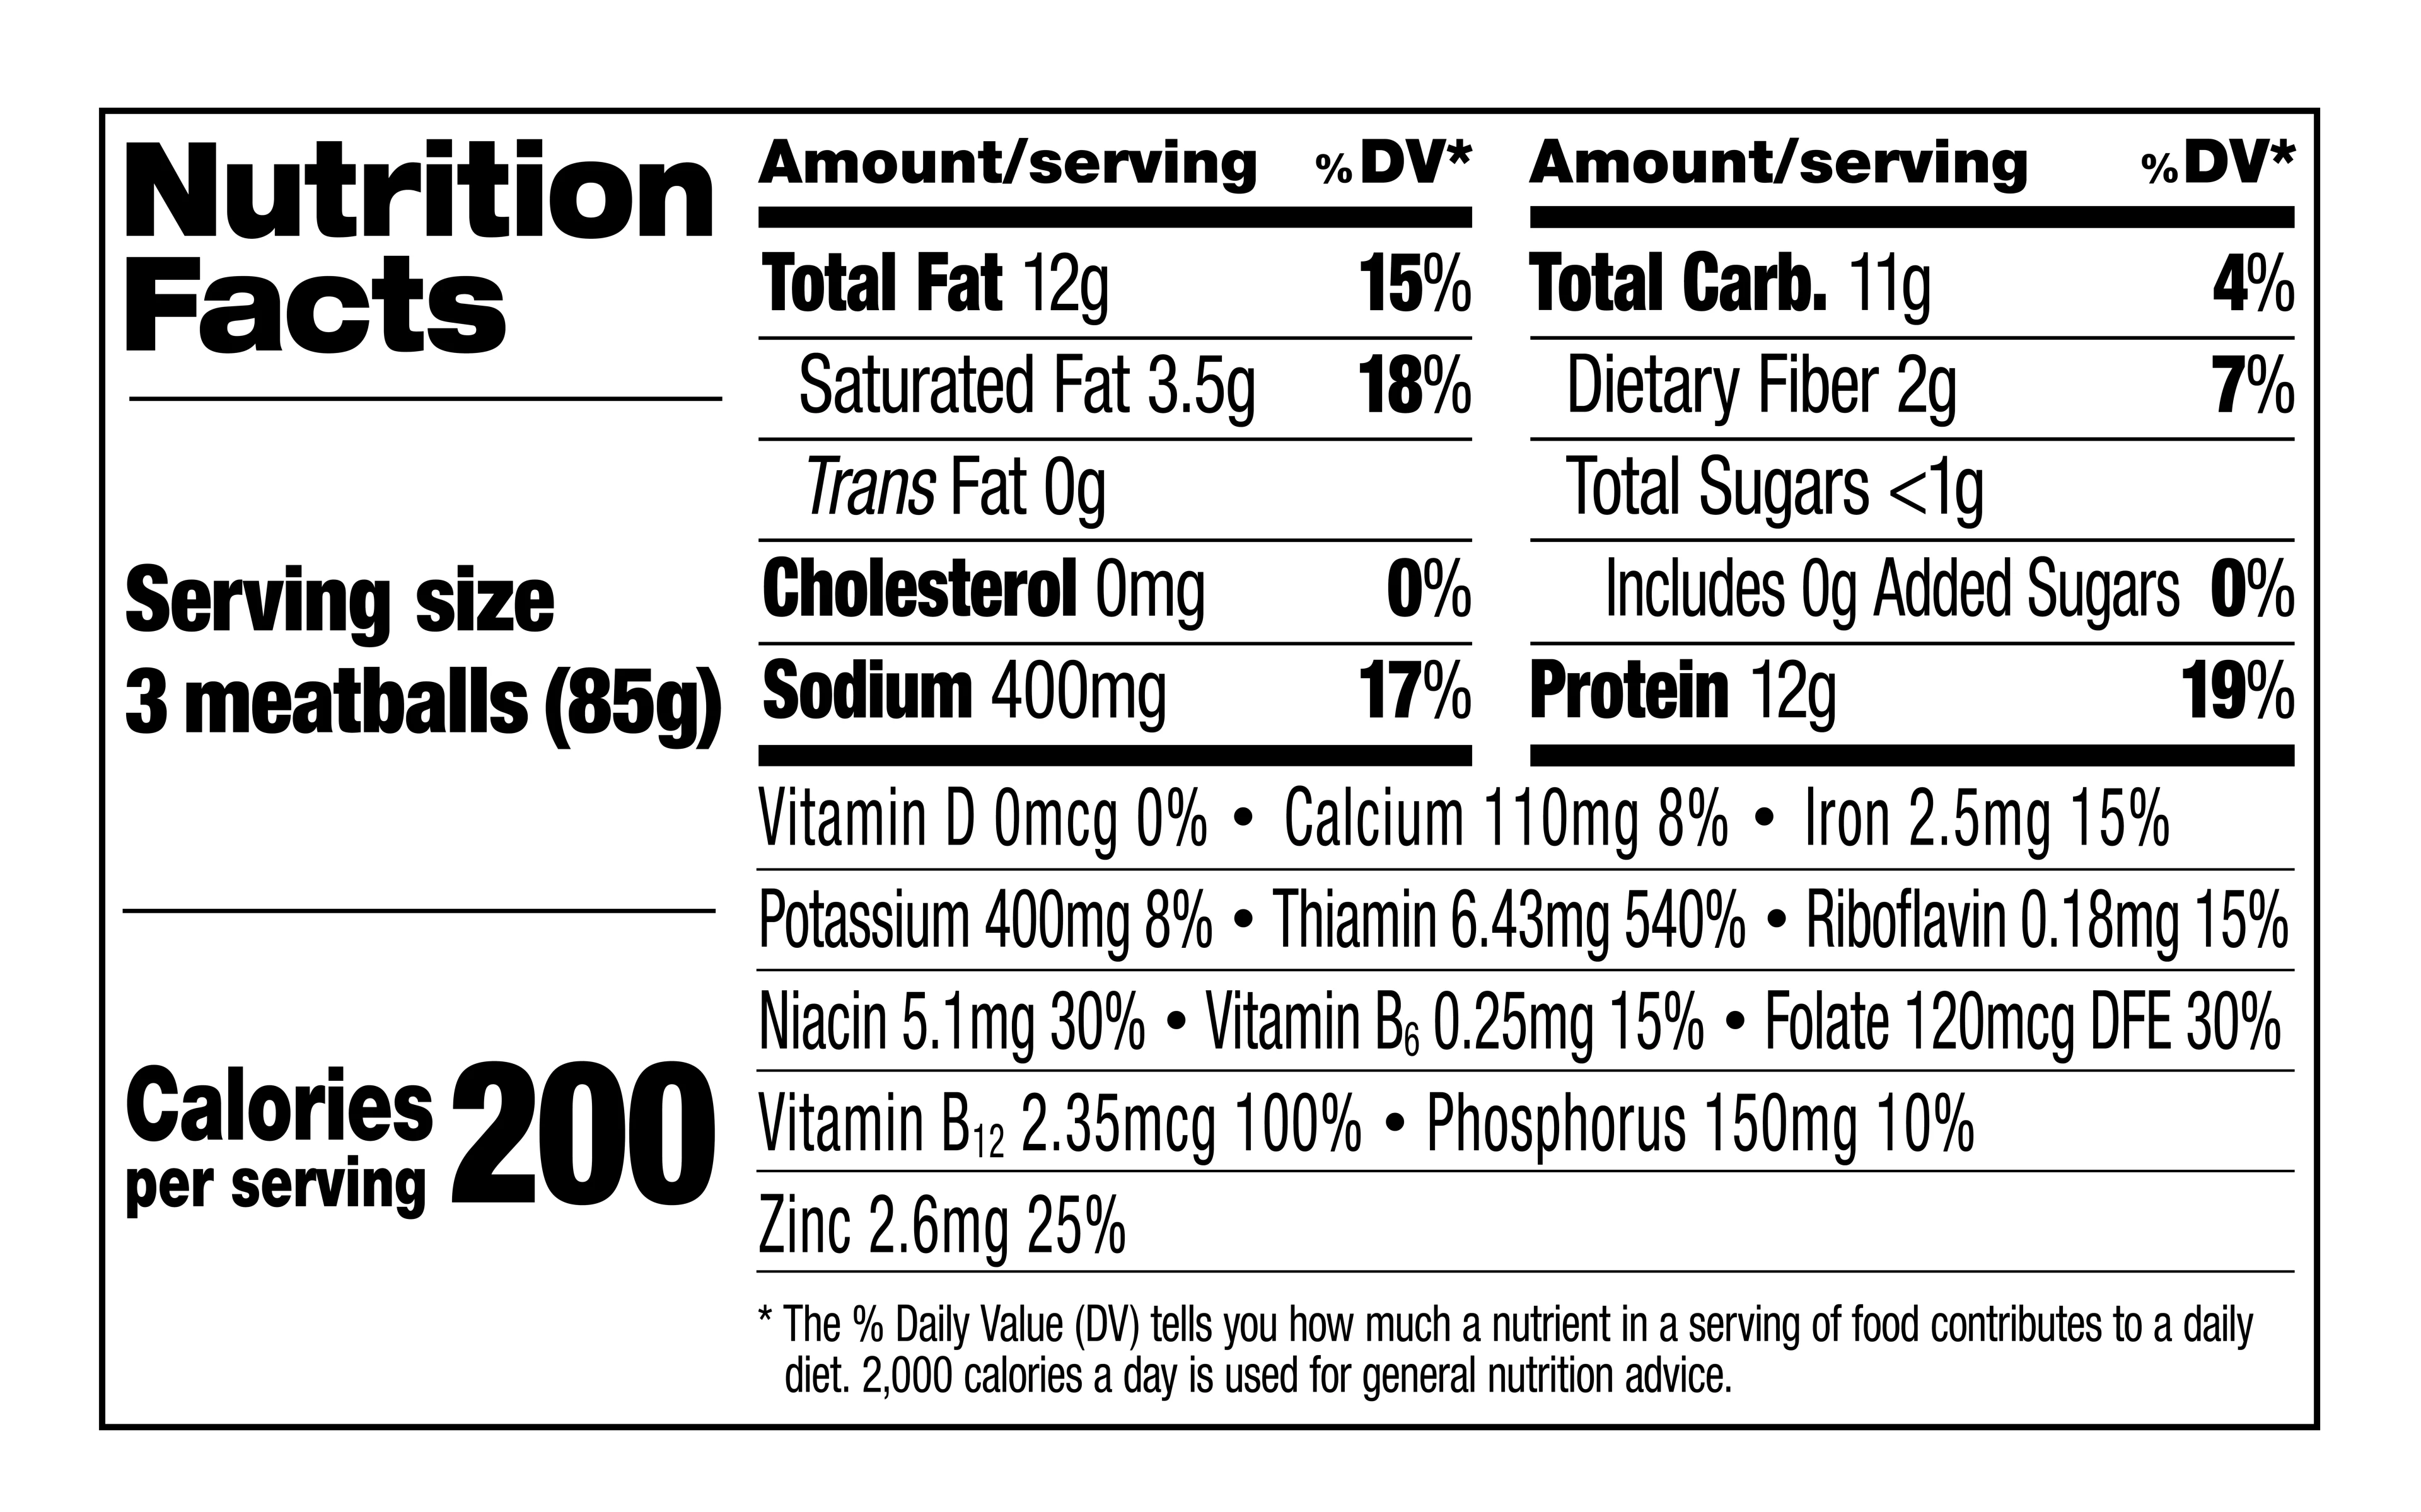 Nutrition Facts for Impossible Meatballs in restaurants